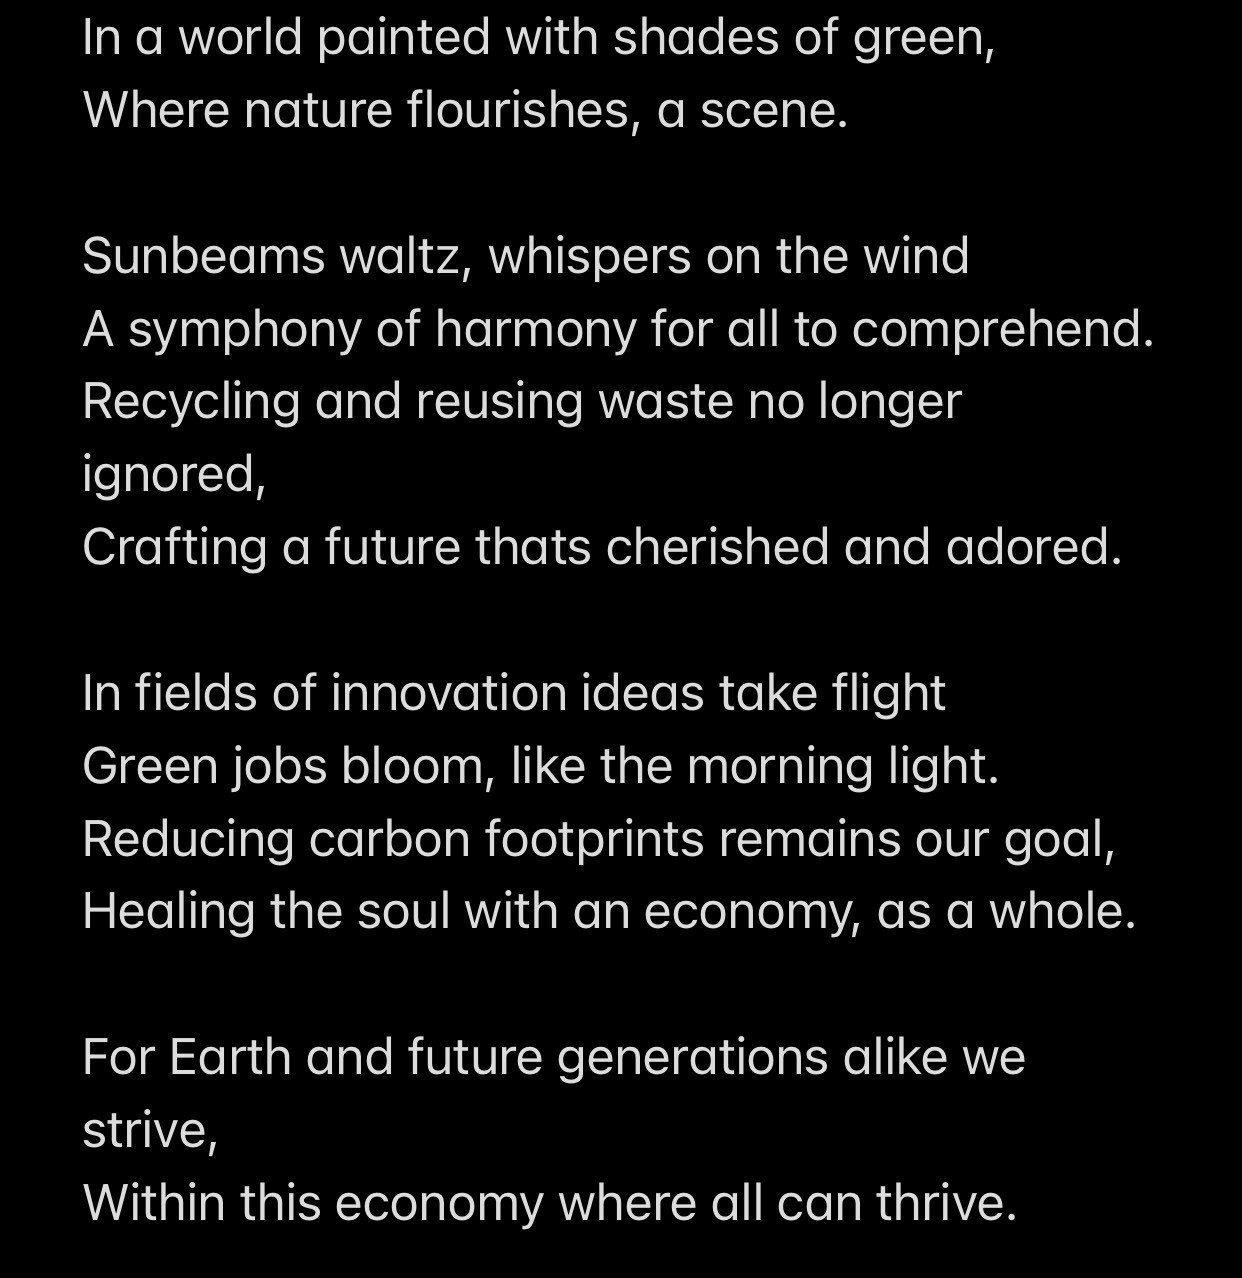 Image showing a poem about the green economy.